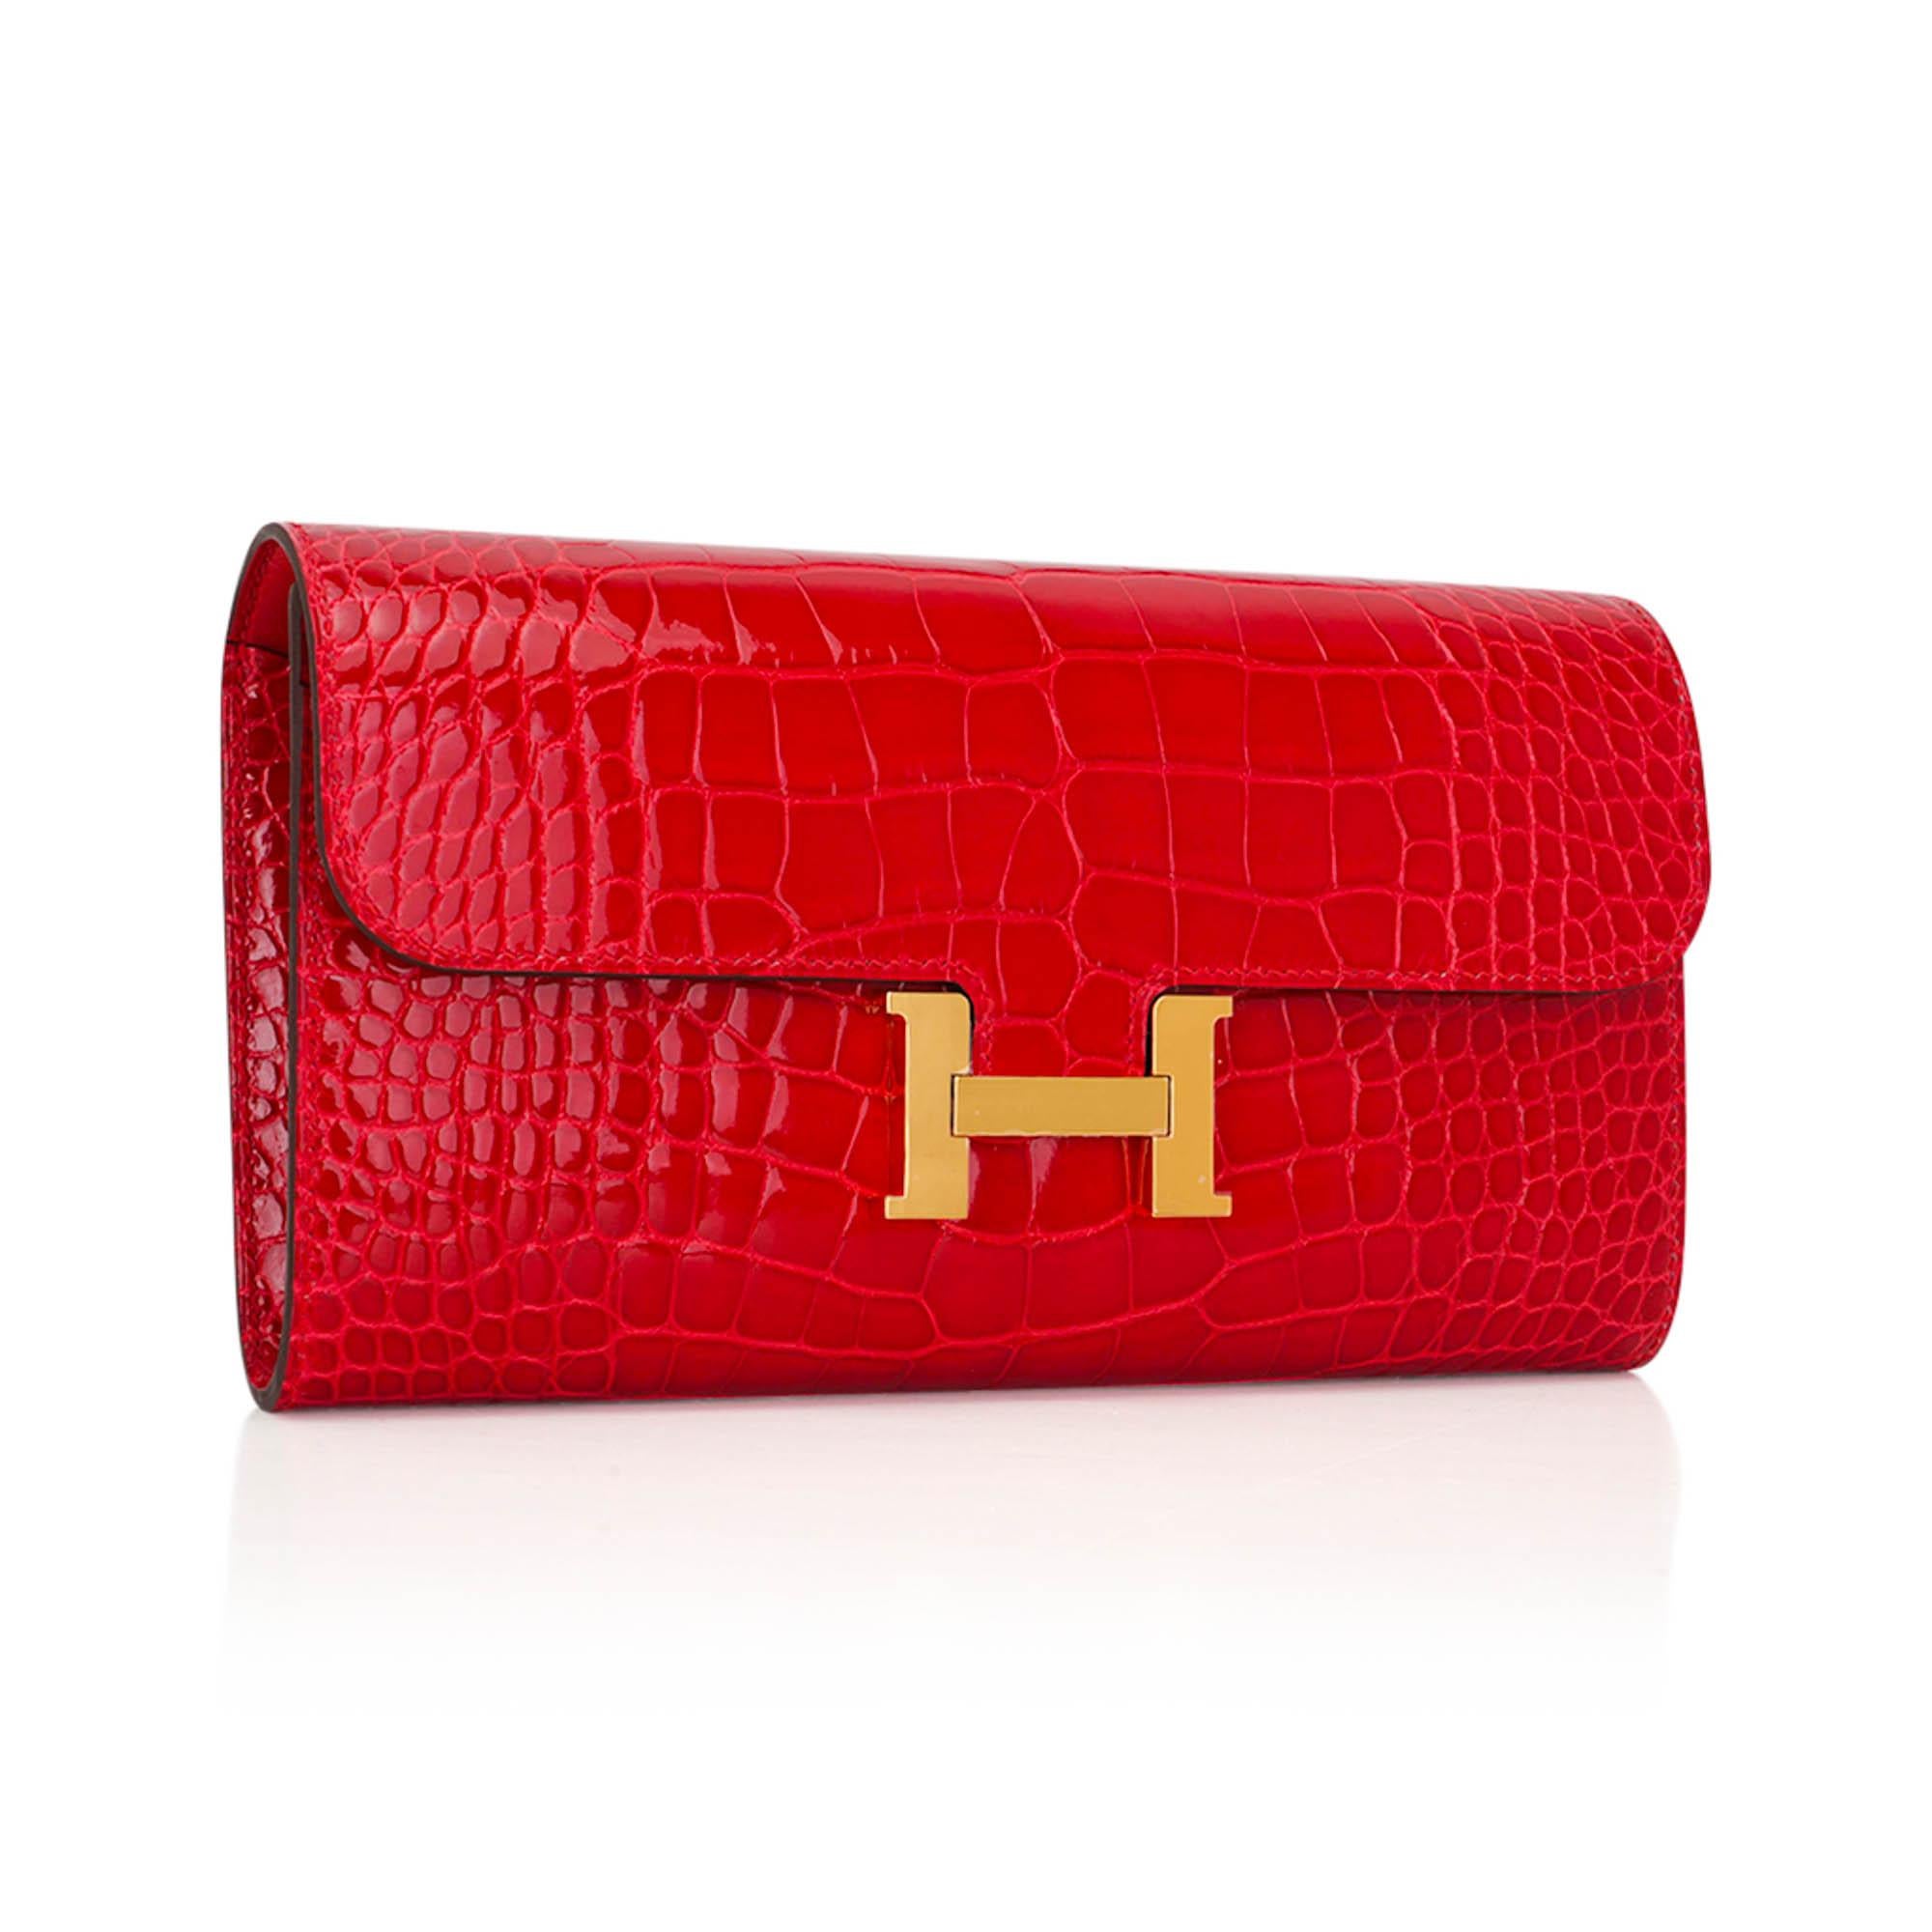 Mightychic offers an Hermes Constance Long To Go Wallet featured in coveted rare Braise Alligator.
This stunning Lipstick Red Braise Constance To Go is accentuated with Gold hardware.
Detachable crossbody shoulder strap converts this gorgeous